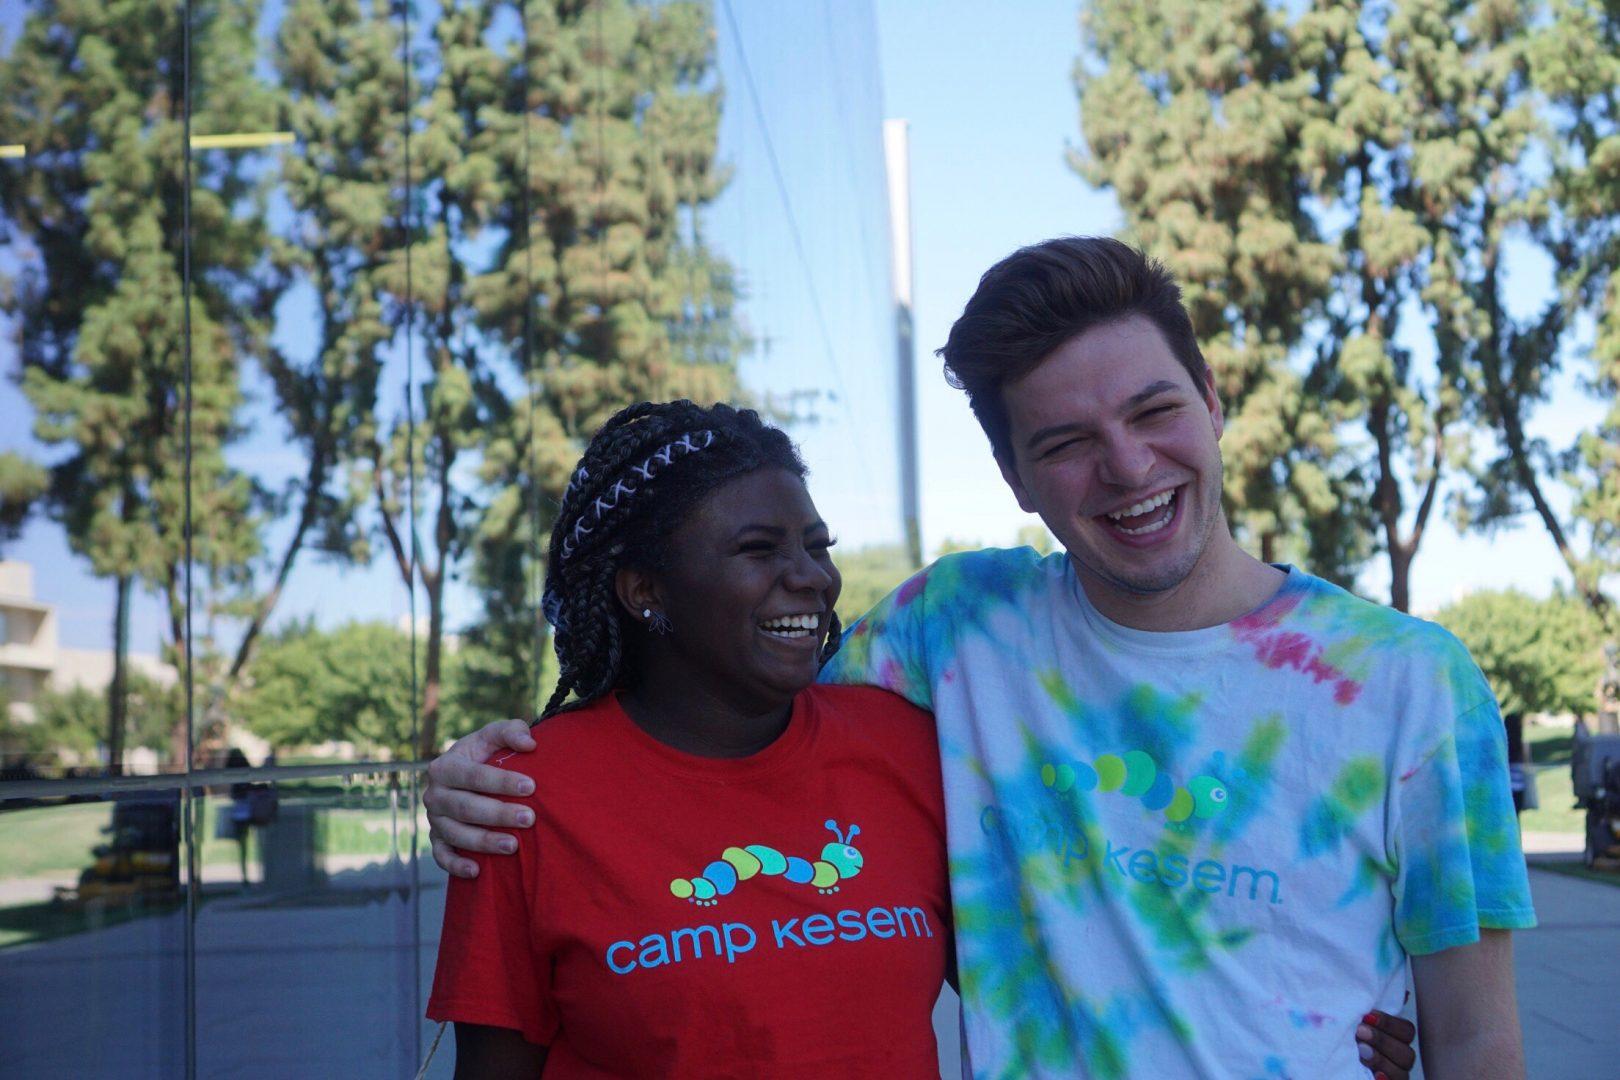 Fresno+State+students+Keyana+Washington+and+Christopher+Rodriguez+who+both+volunteer+their+time+at+Camp+Kesem%2C+a+weeklong+retreat+for+children+whose+parents+have+been+affected+by+cancer%2C+stand+outside+the+Henry+Madden+Library.+%28Contributed%29